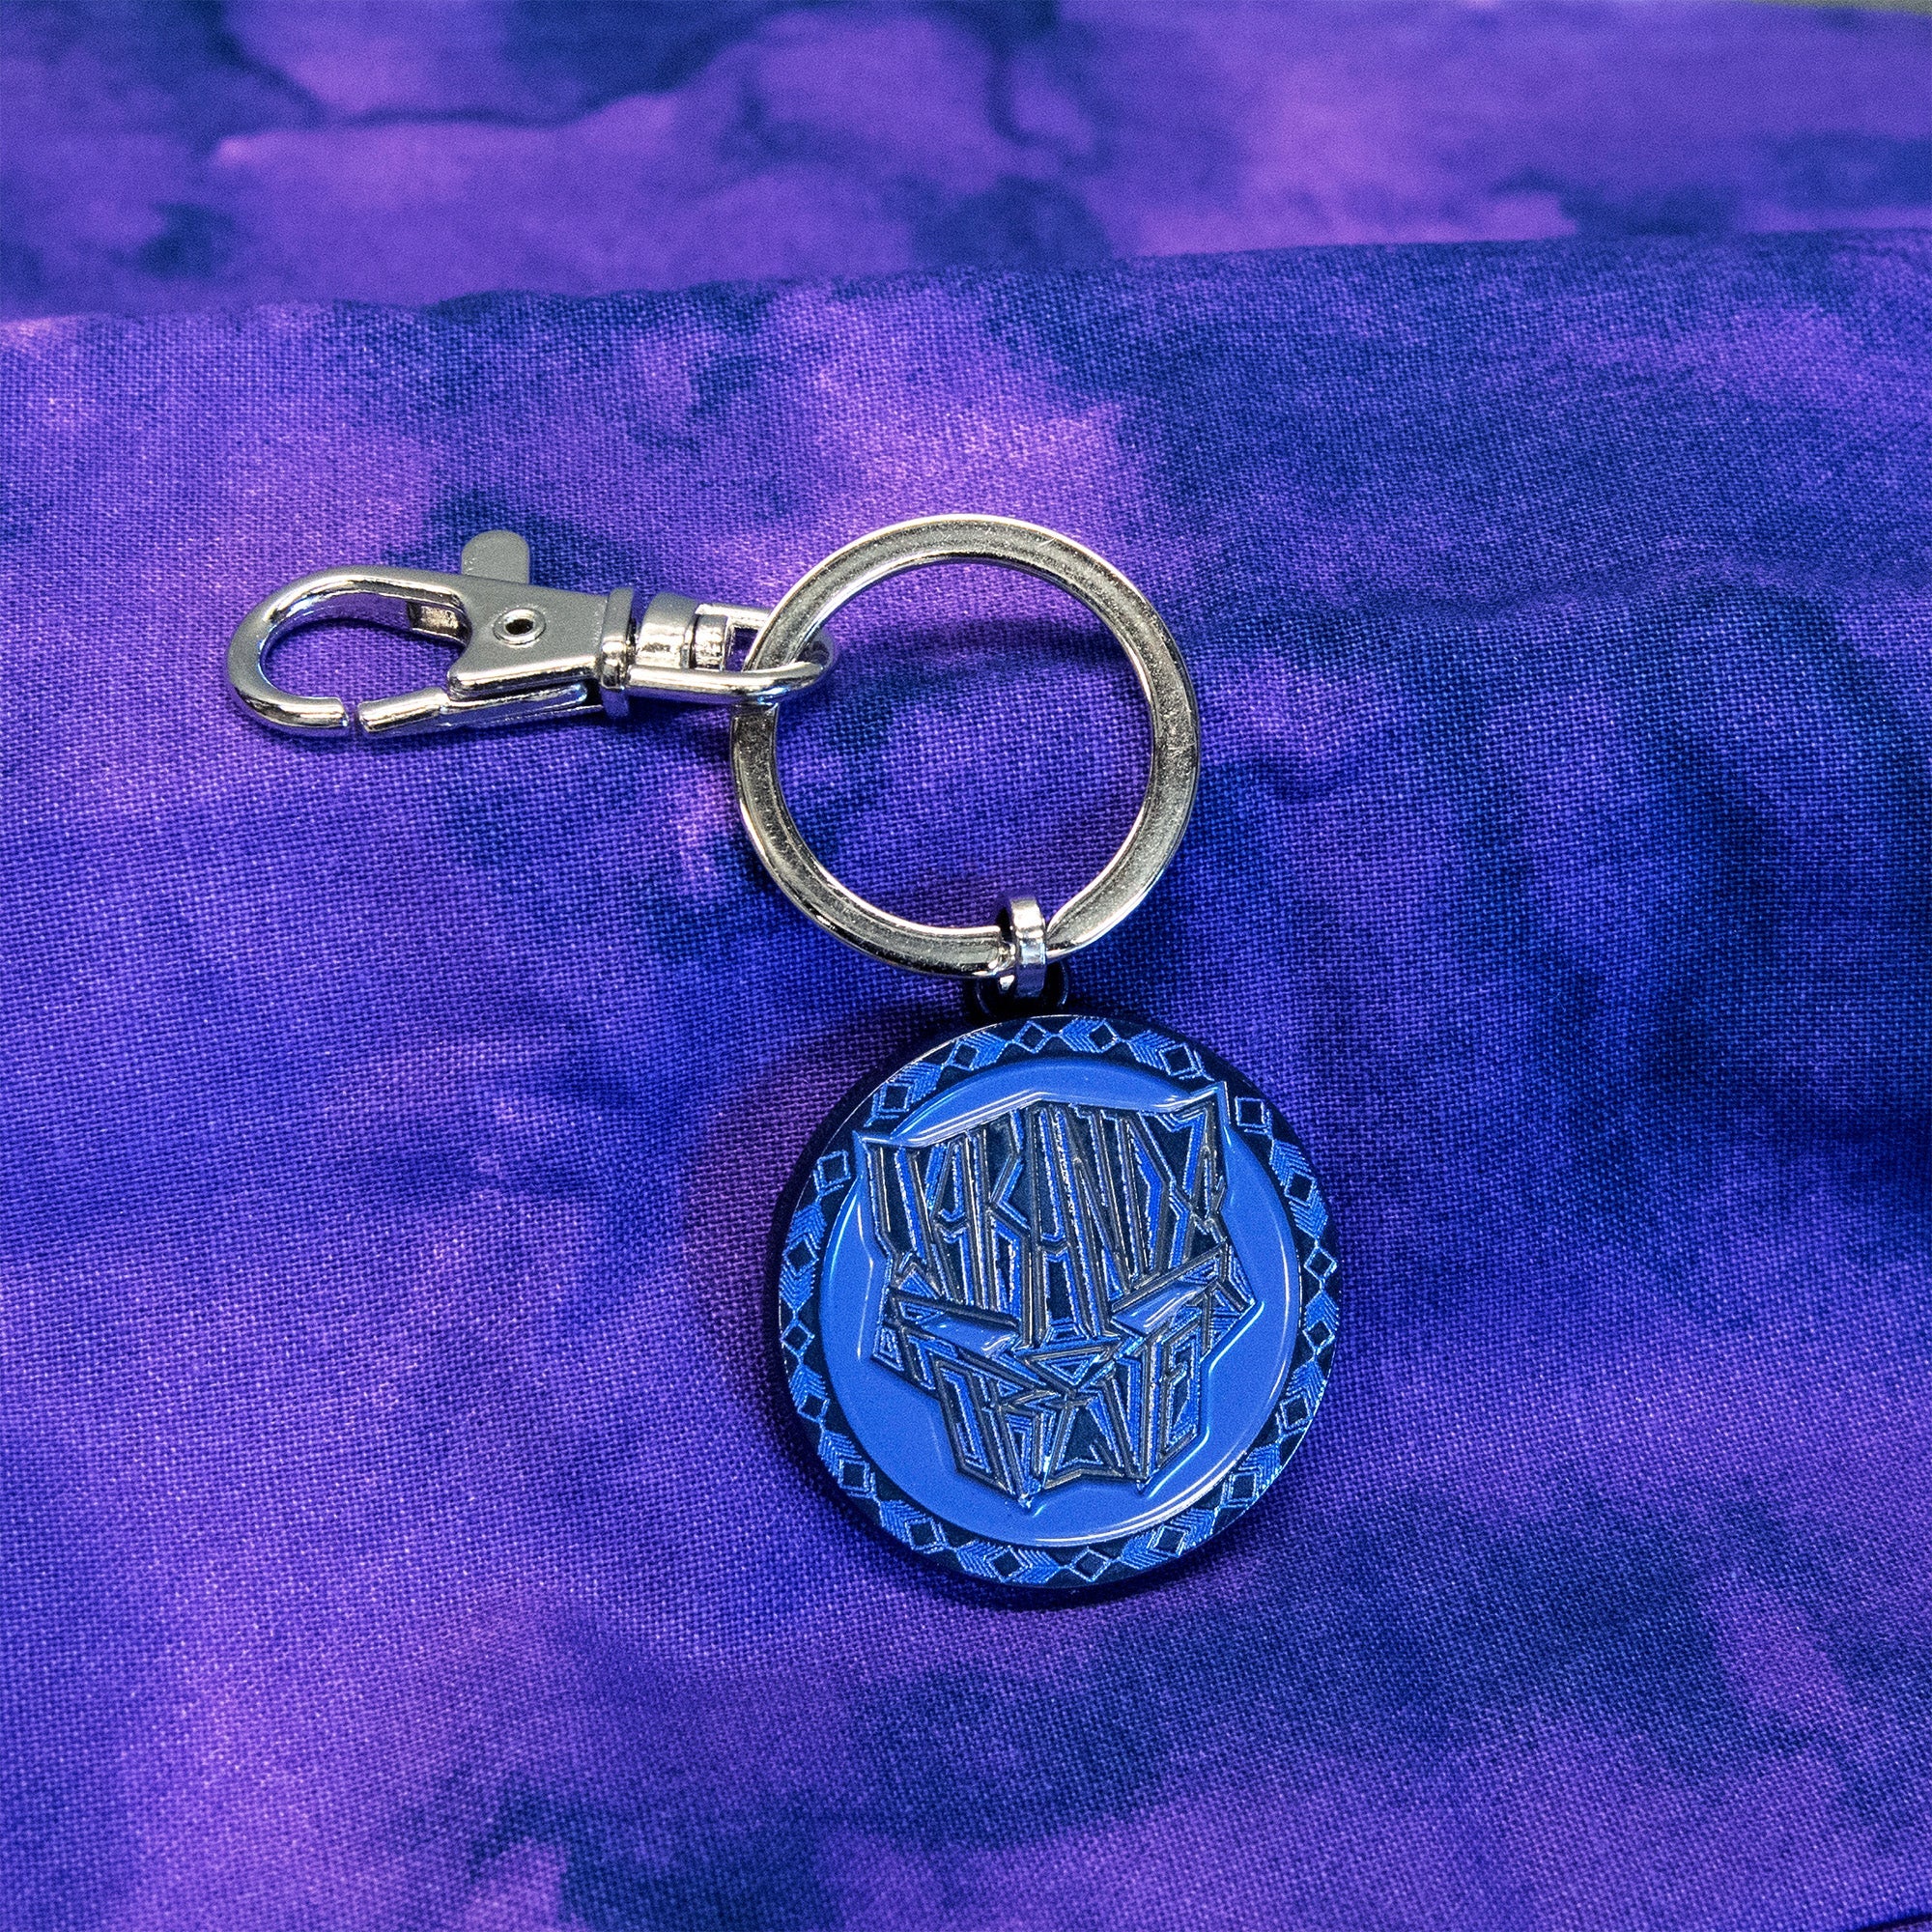 Black Panther: Wakanda Forever Panther Text Keychain